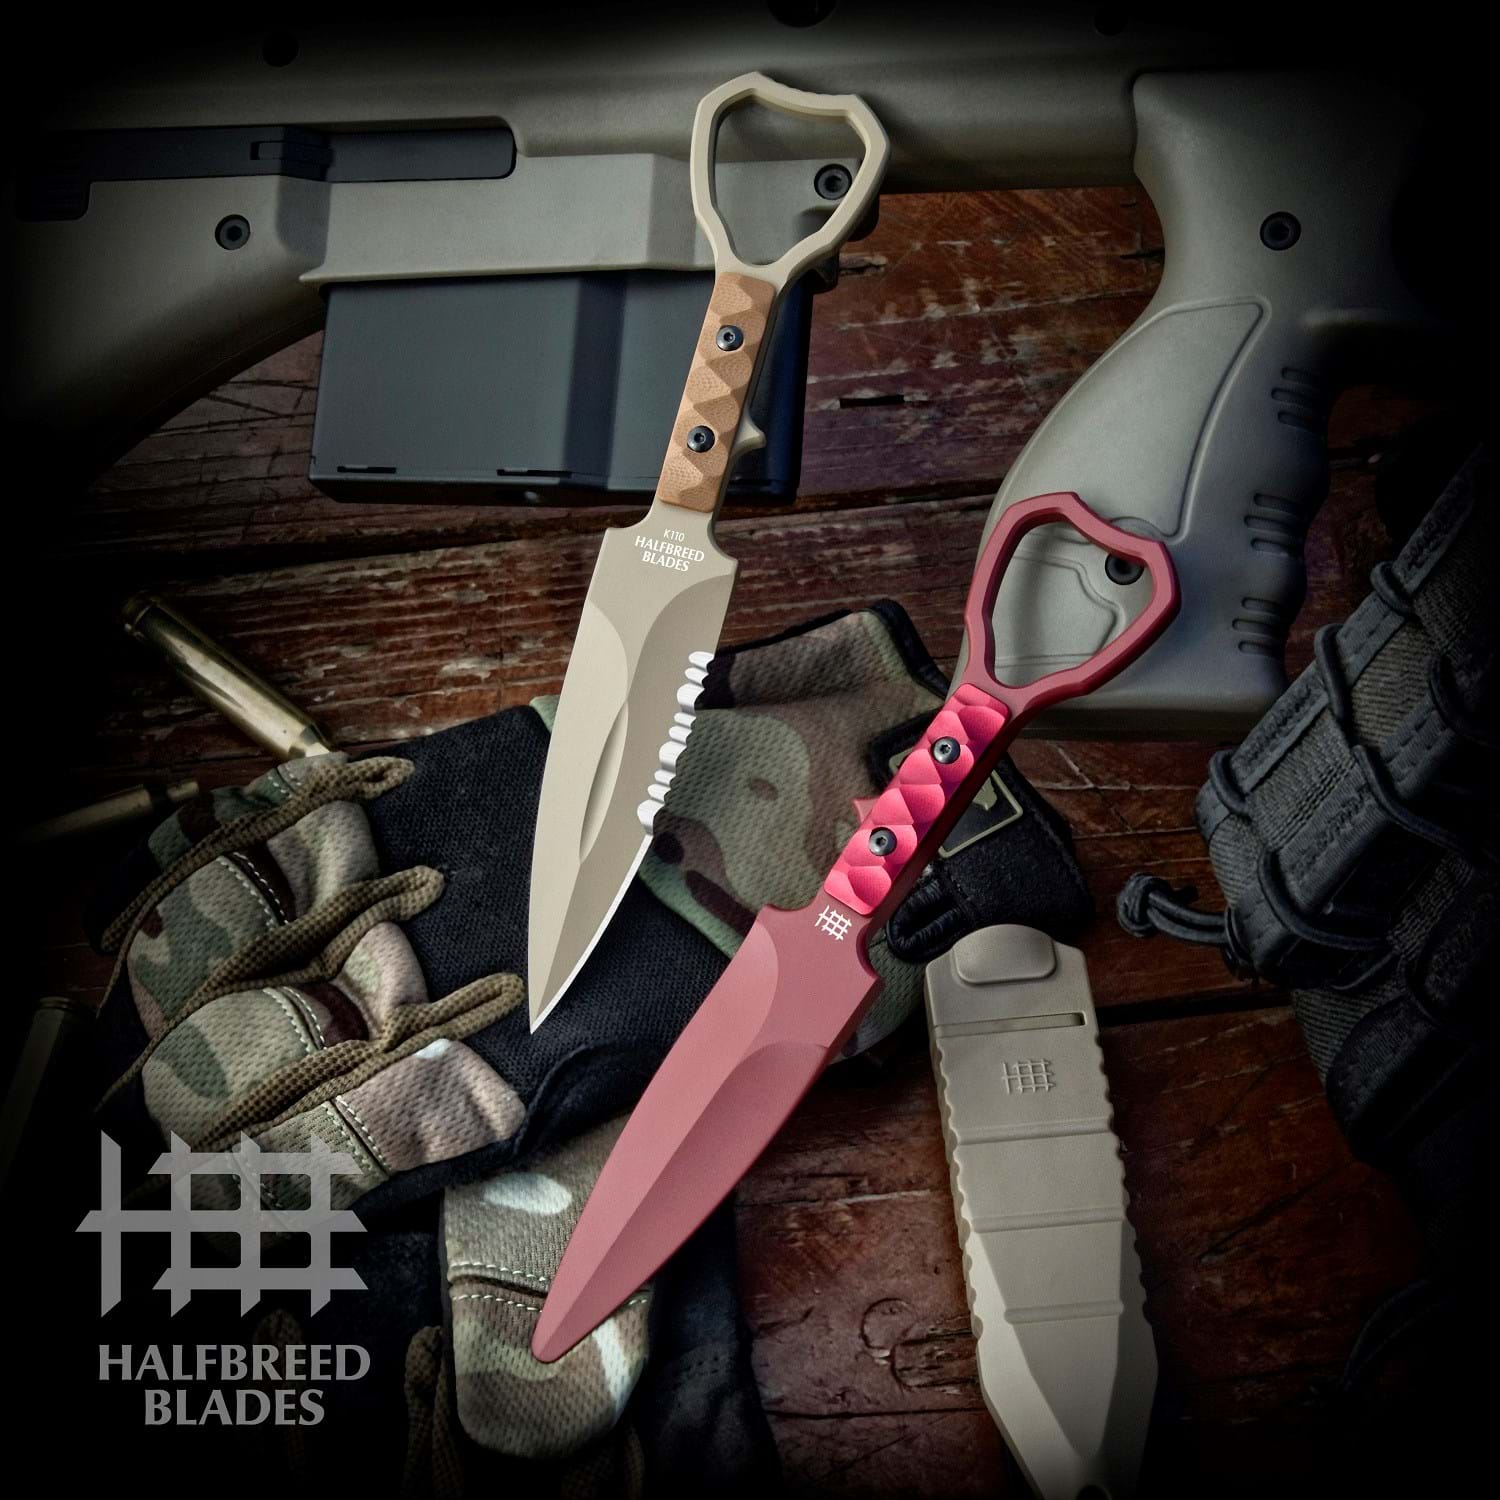 Halfbreed Blades CCK-01 Gen-2 Compact Clearance Knife - Trainer 2